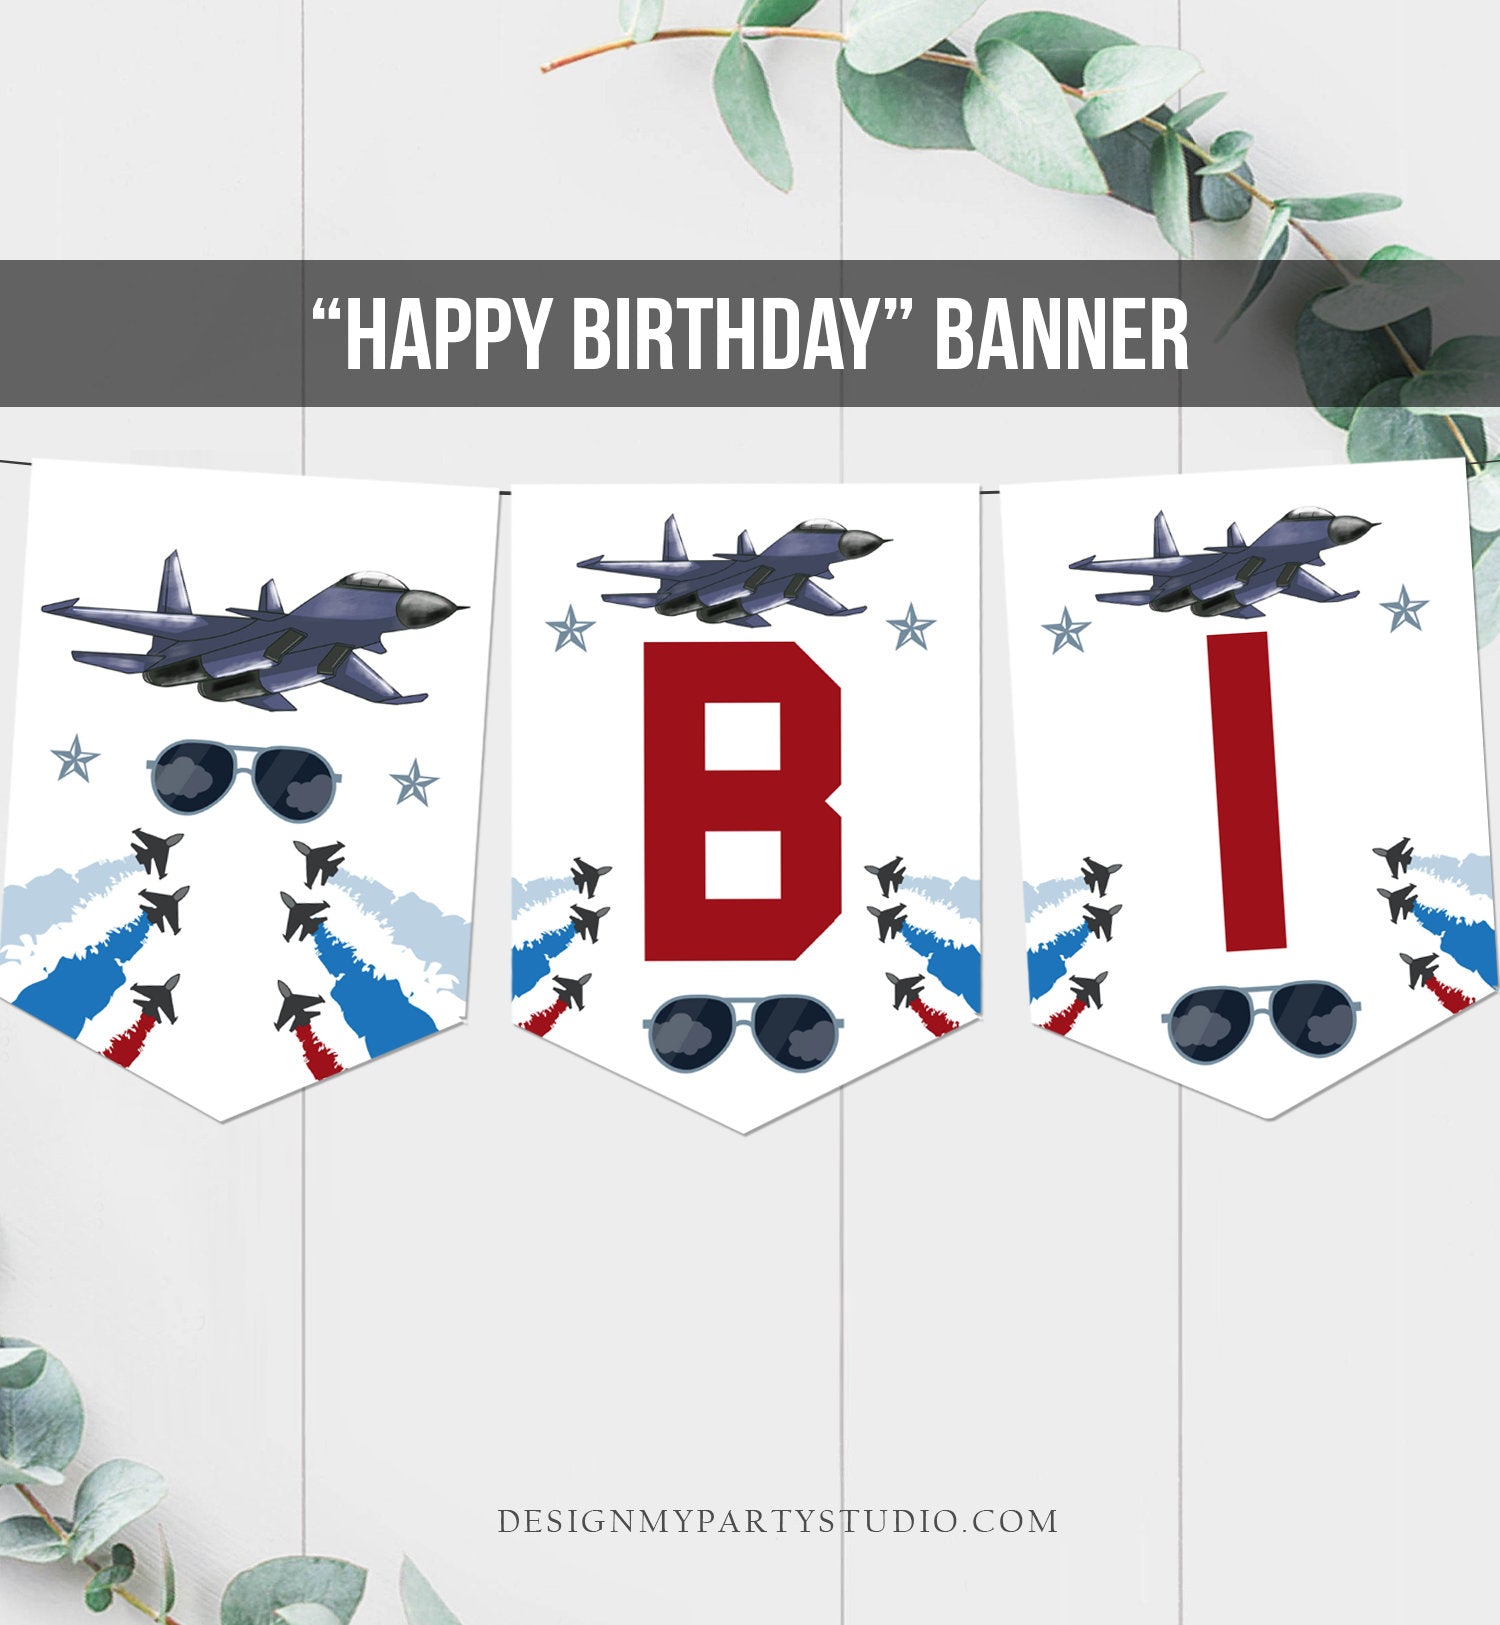 I Feel The Need For Speed Fighter Pilot Birthday Poster